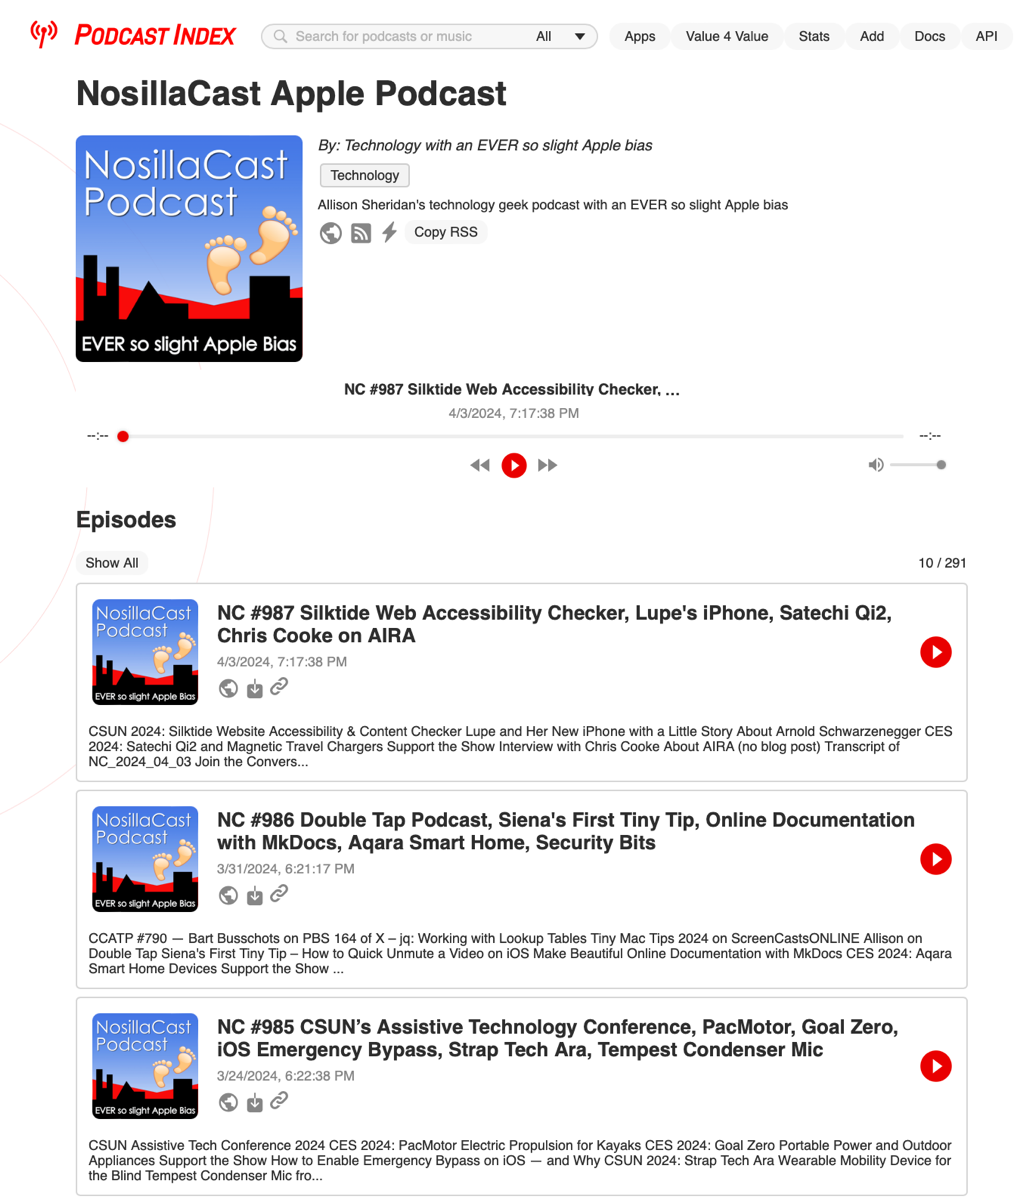 Podcast Index showing multiple episodes of the NosillaCast.